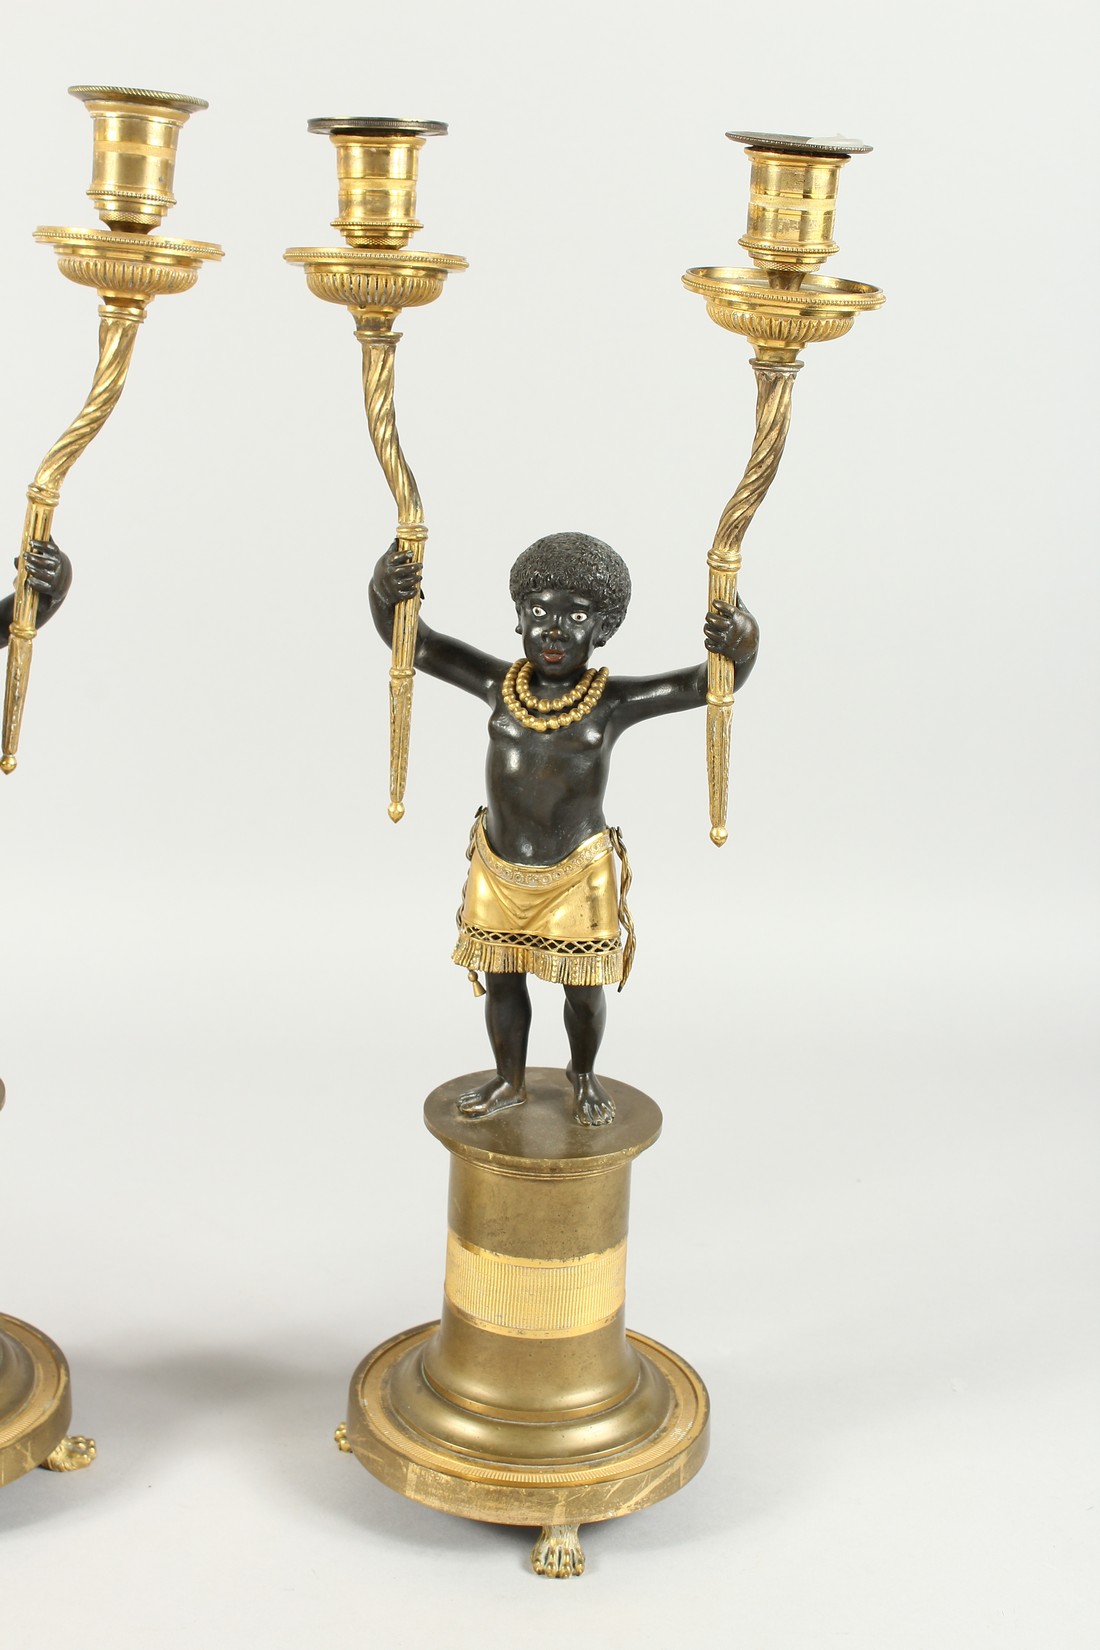 A SUPERB PAIR OF EMPIRE BRONZE AND GILT BRONZE TWO BRANCH CANDLESTICKS of nubian children holding - Image 3 of 9